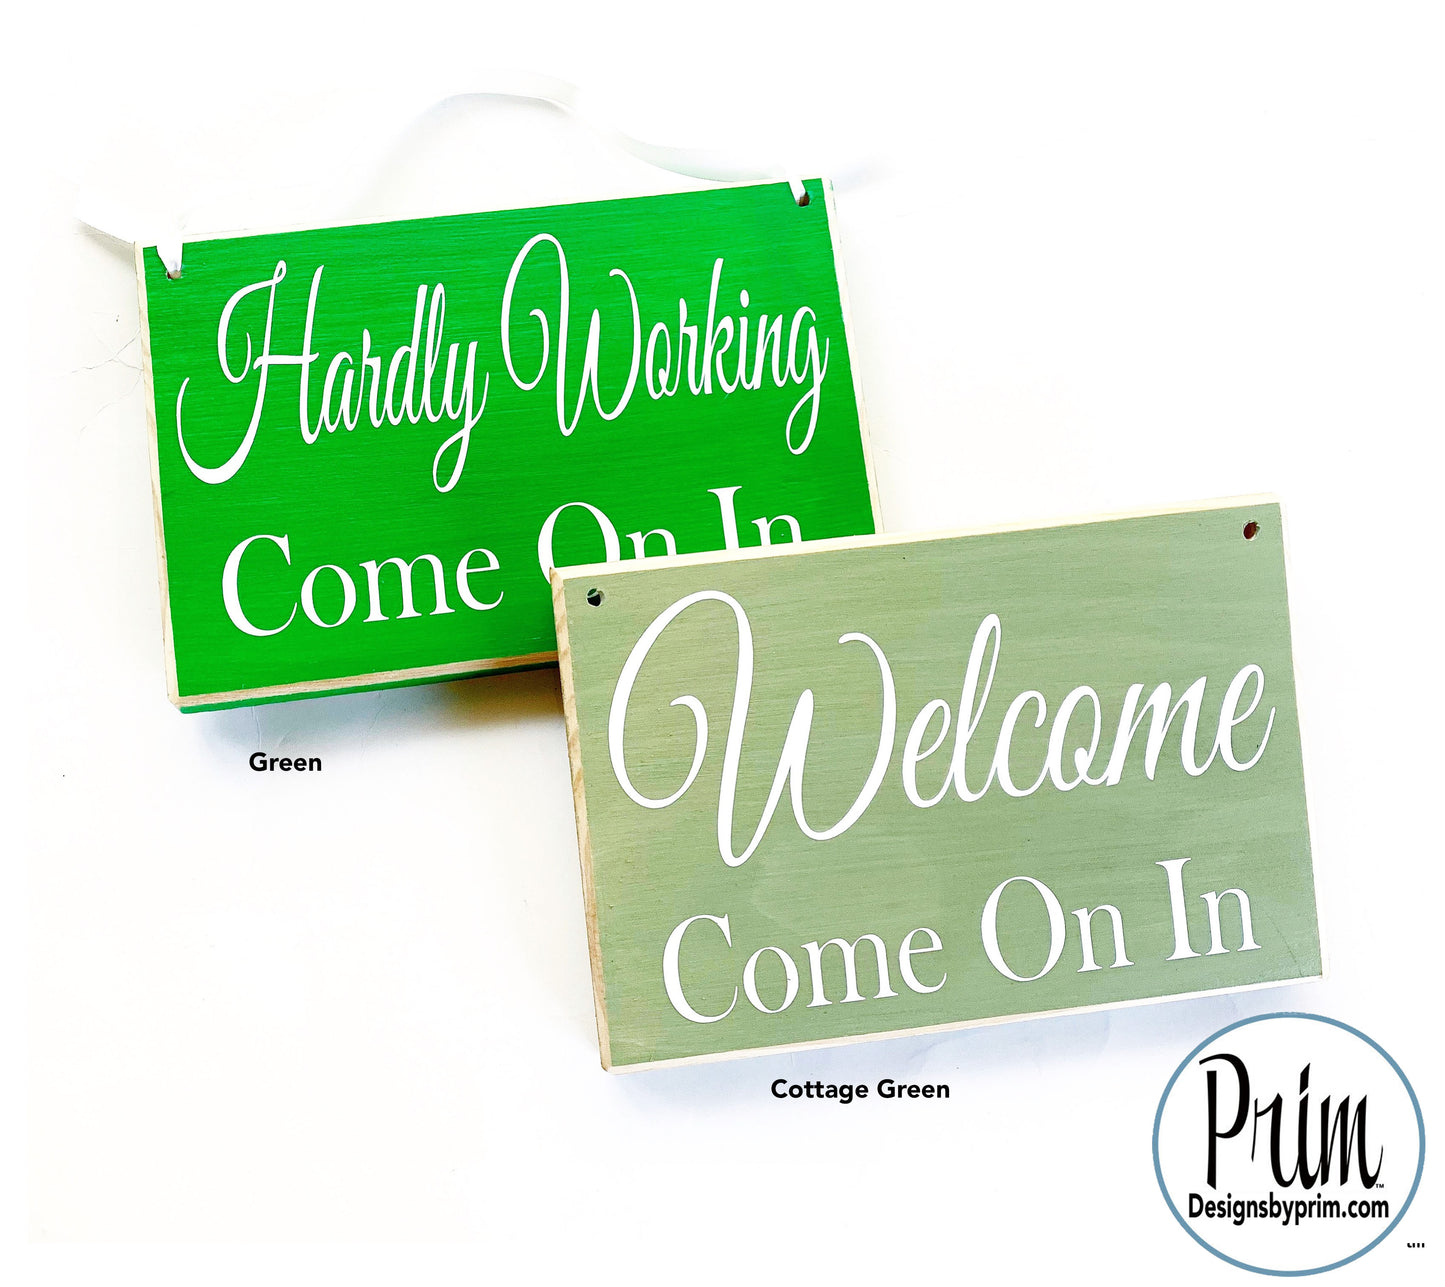 Designs by Prim 10x8 STOP Meeting In Progress Please Do Not Disturb Custom Wood Sign | Office Working From Home Zoom Busy In Session Virtual Door Plaque